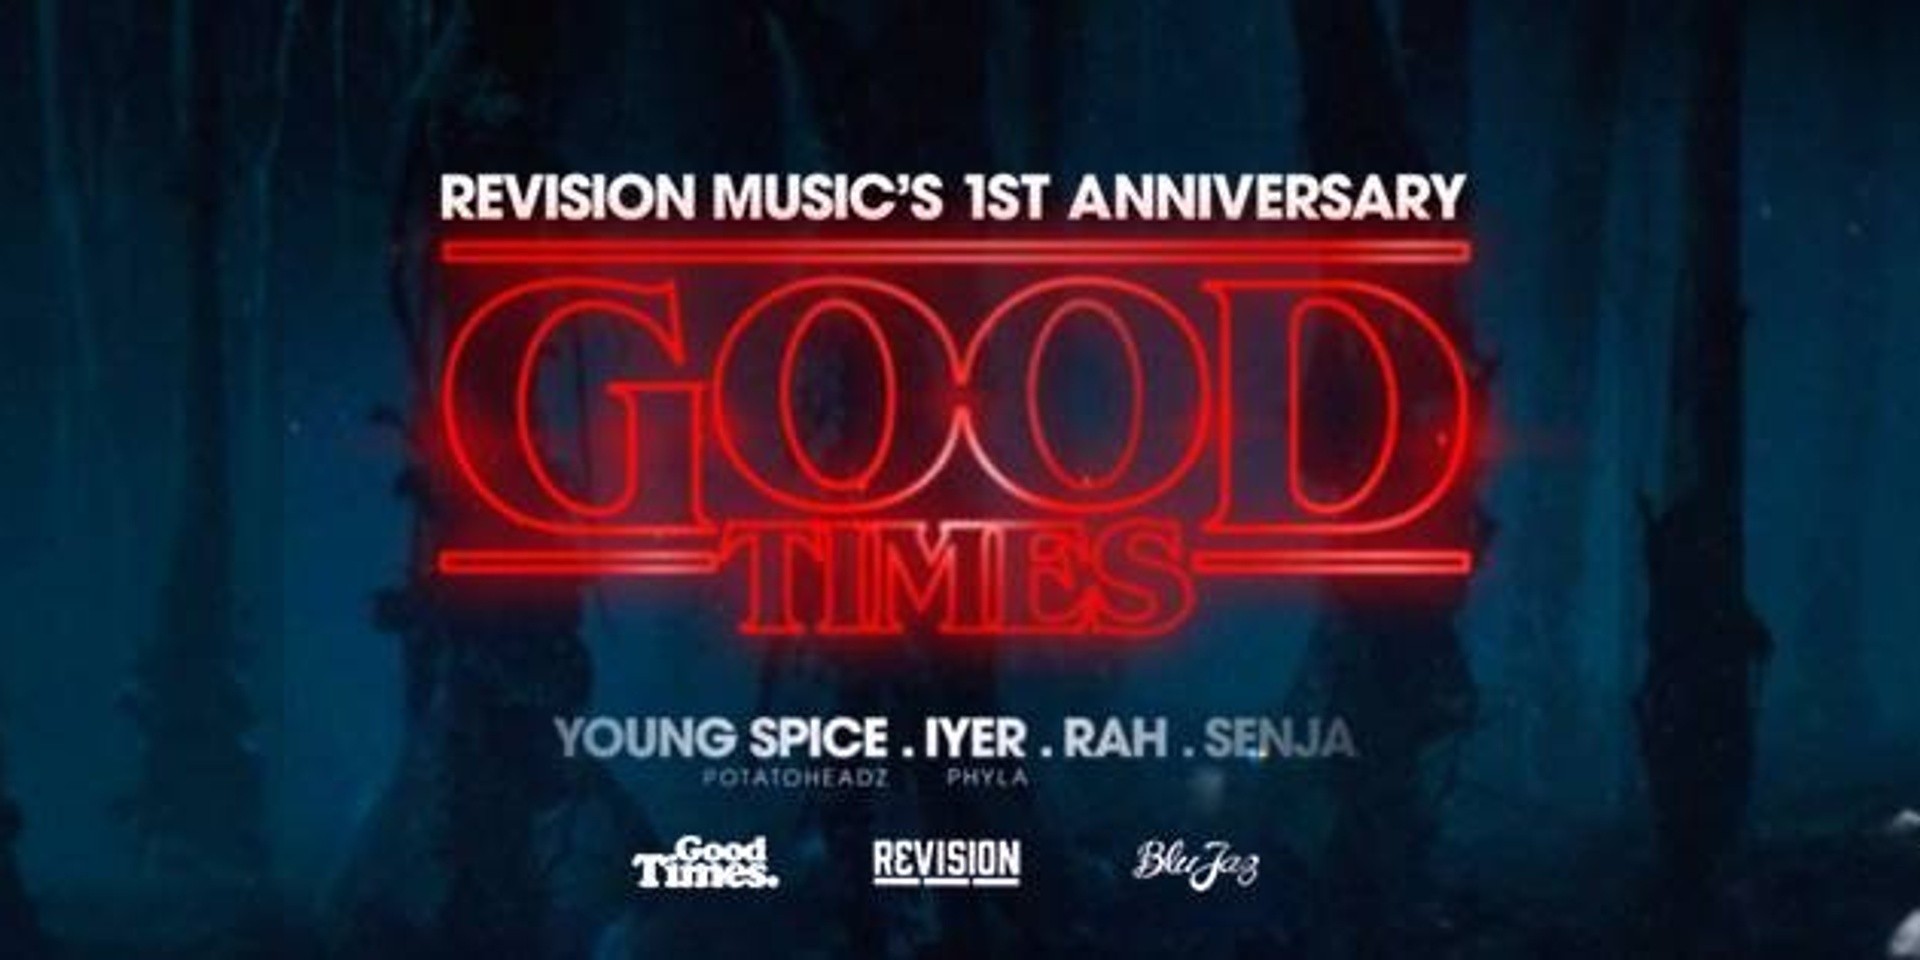 Revision Music celebrates their 1st Anniversary with Good Times